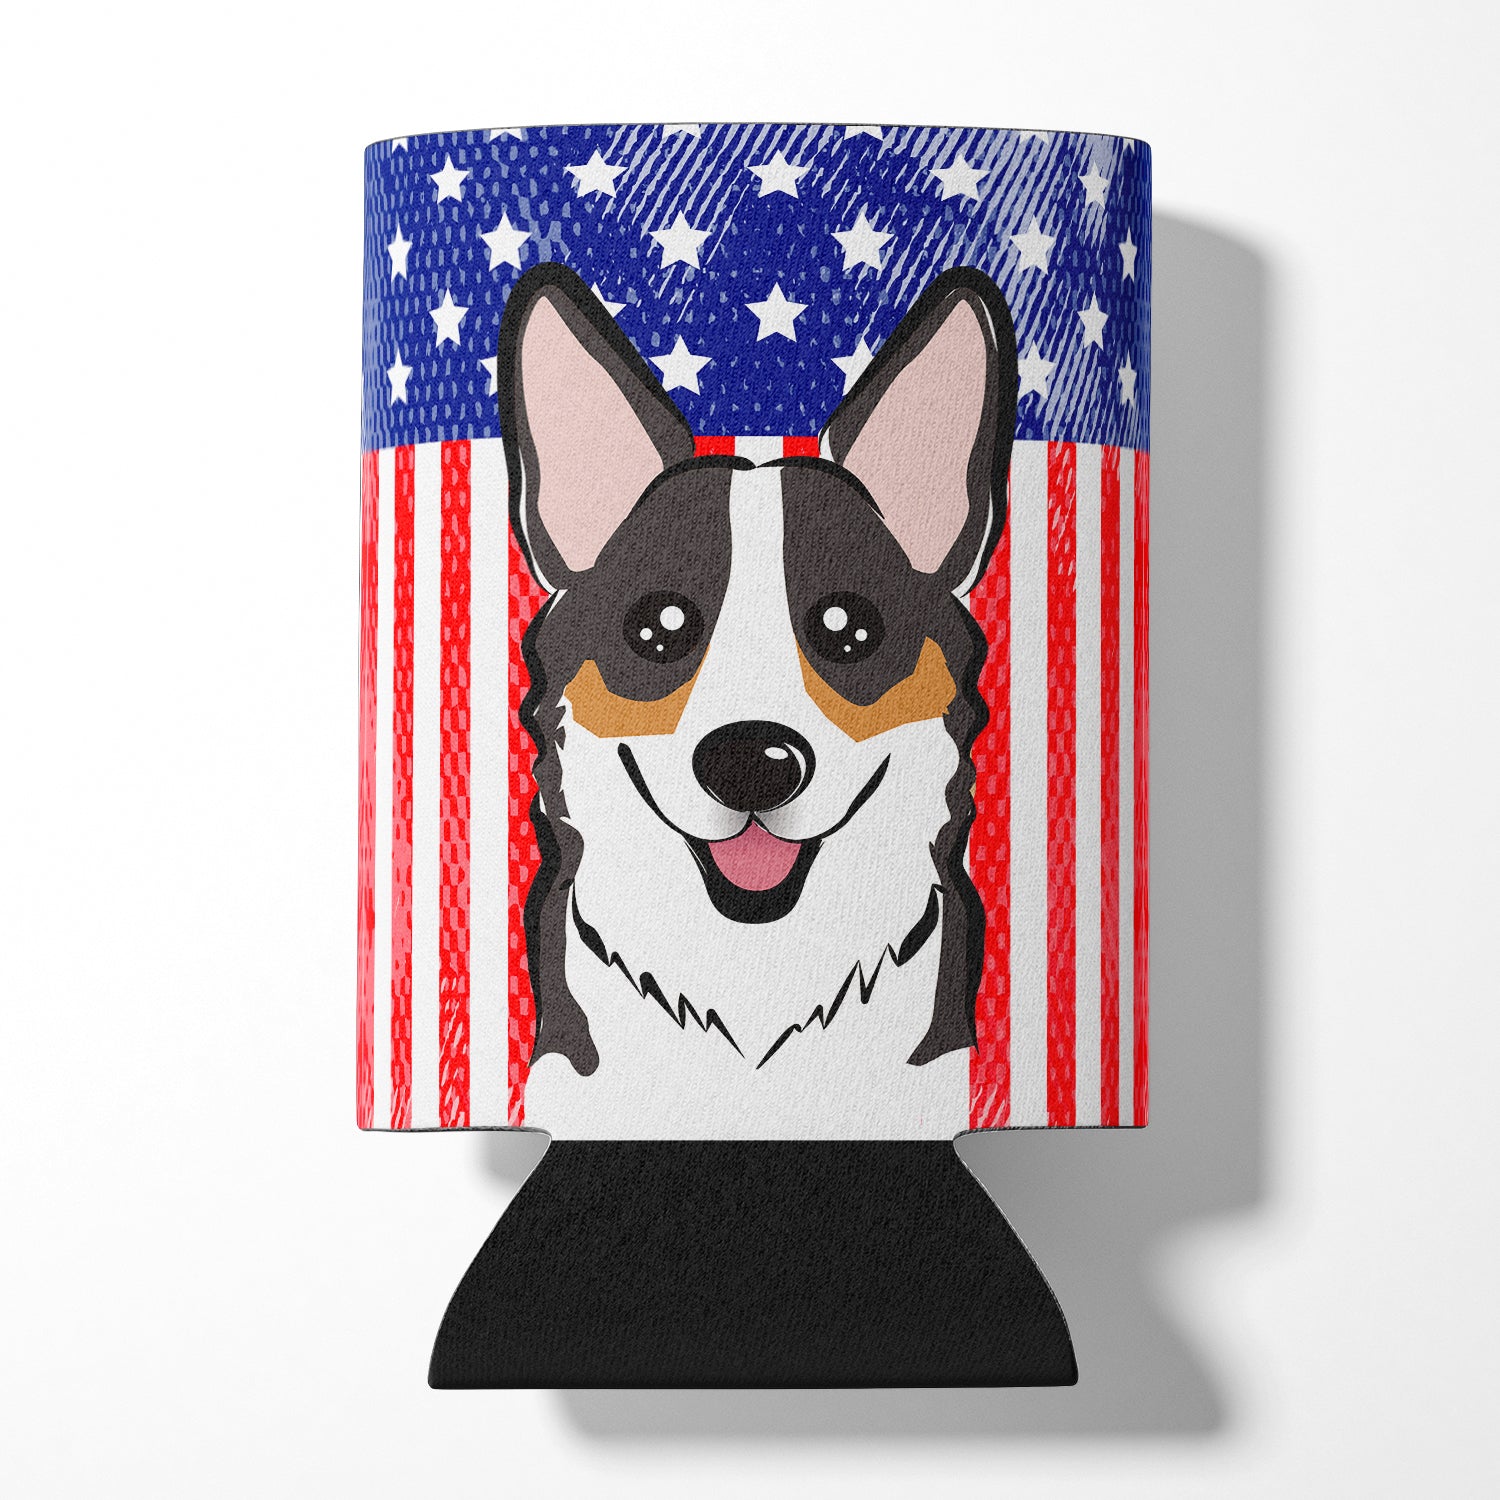 American Flag and Tricolor Corgi Can or Bottle Hugger BB2185CC.